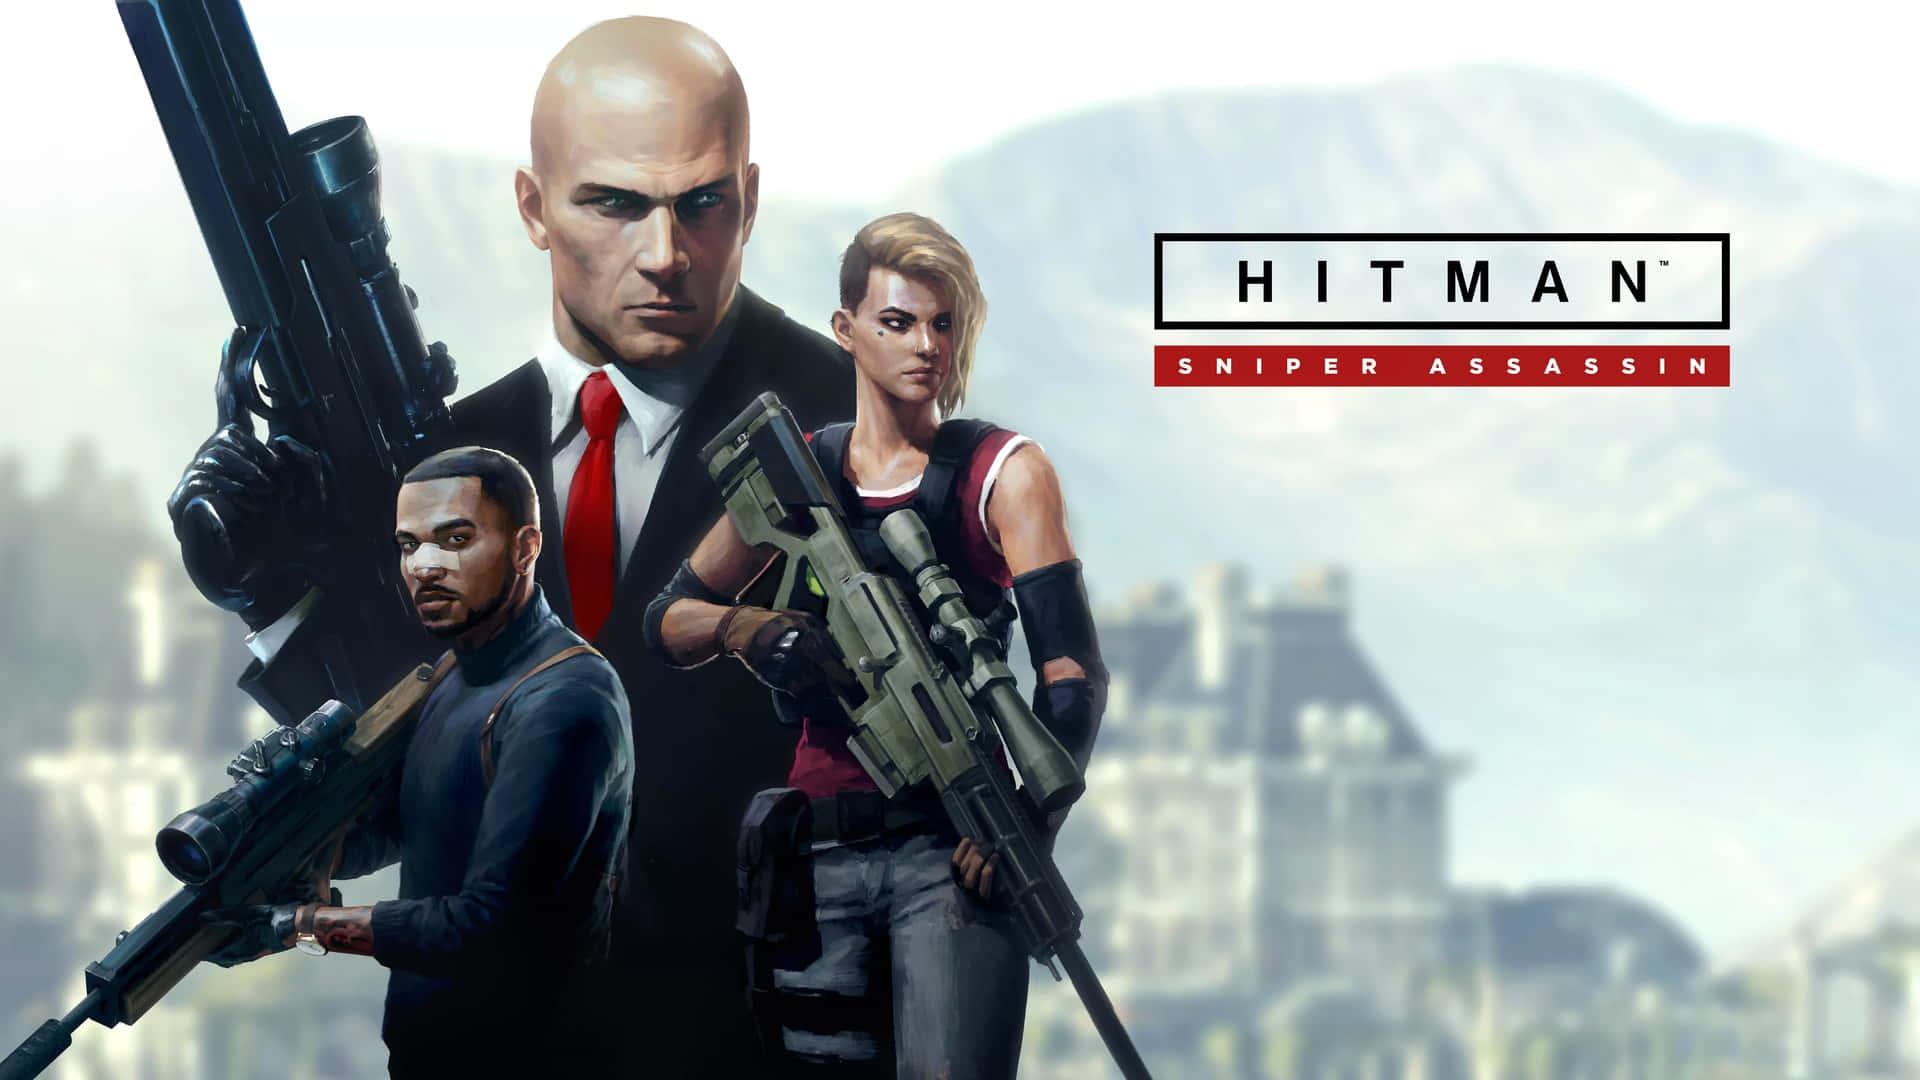 Agent 47 Ready for Action in Hitman 2